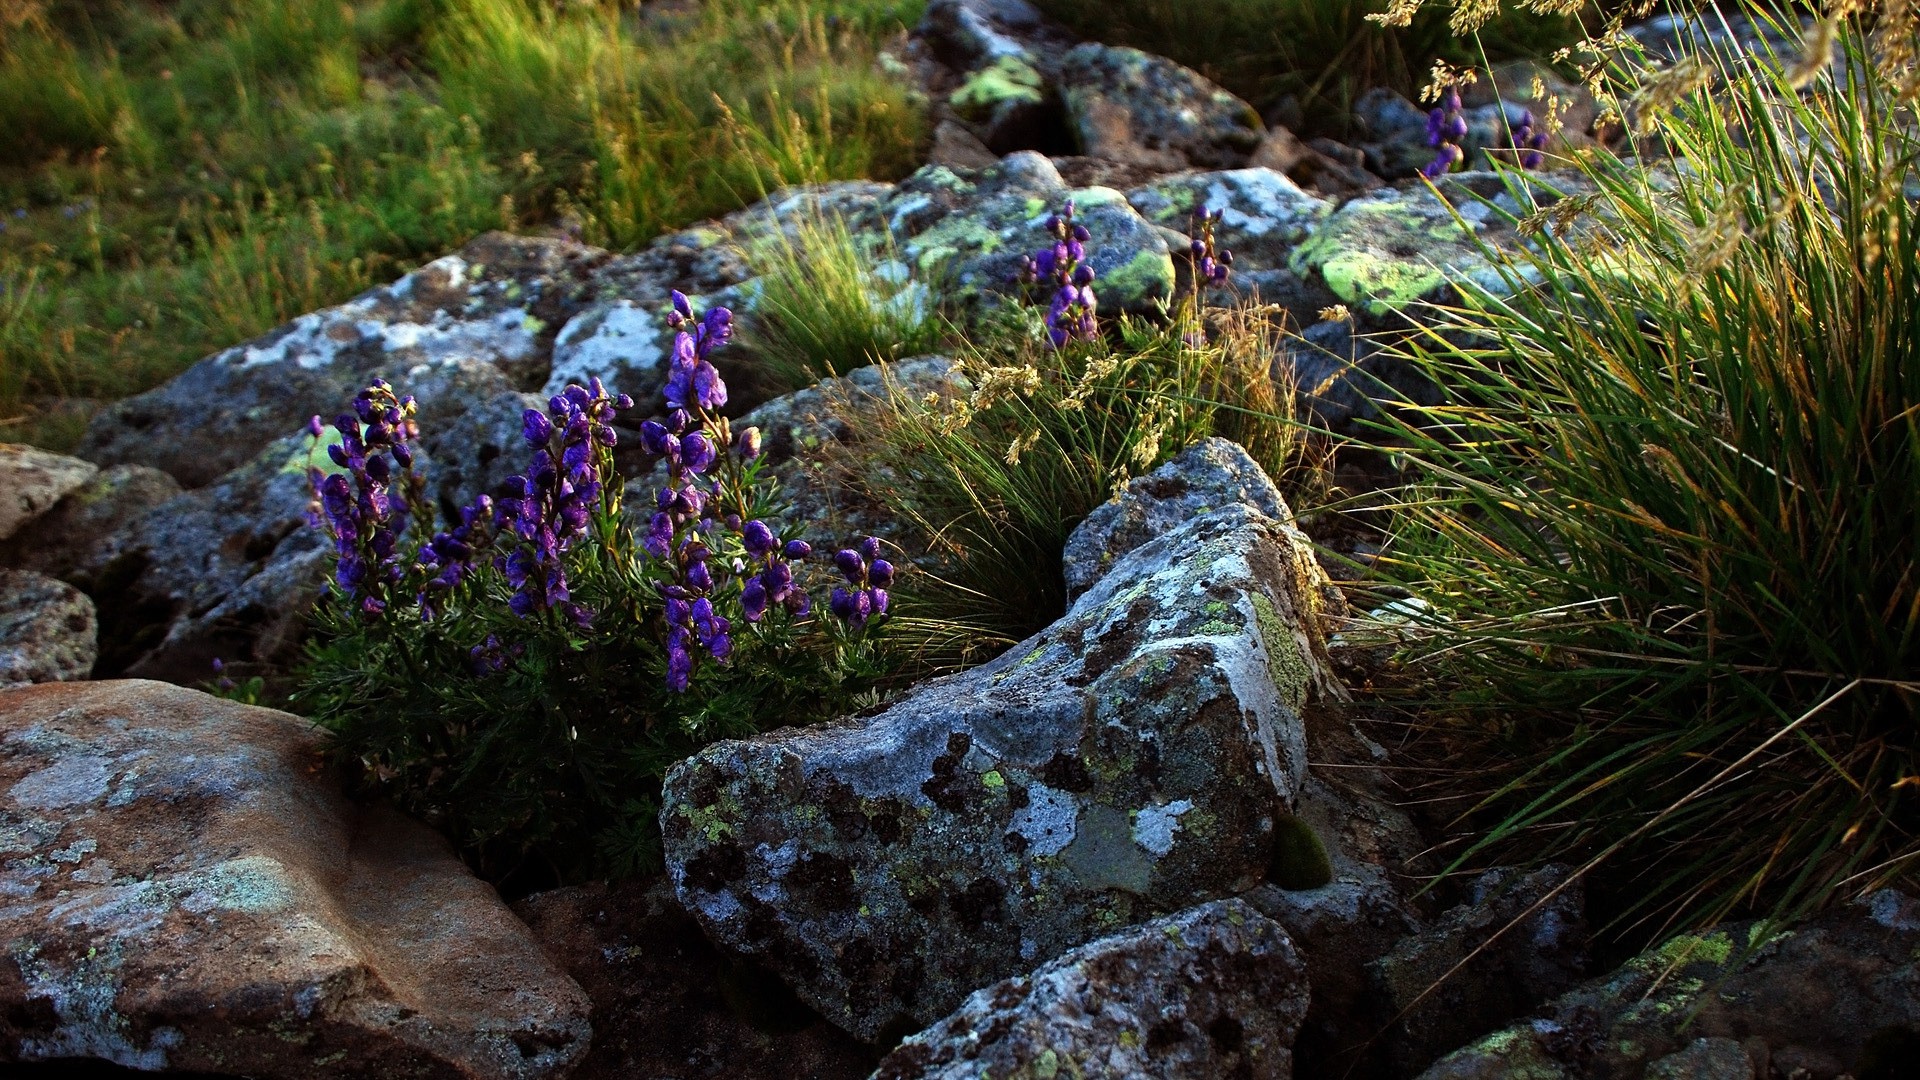 1920x1080 wallpapers: flowers, stones, lilac, grass (image)